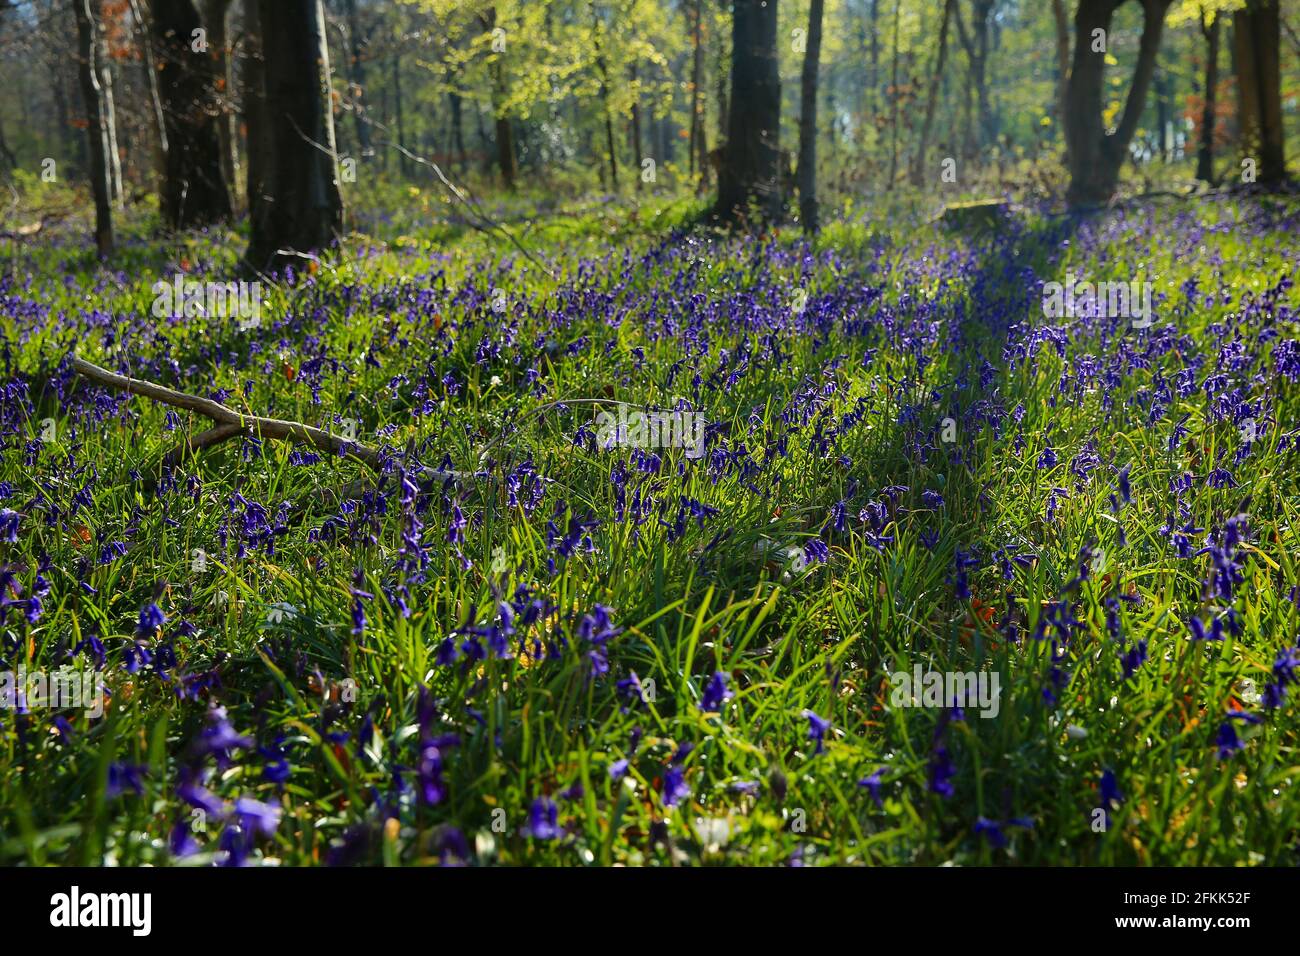 Bluebells in the woods, Gloucestershire May 2021. The bluebell is a symbol of humility, constancy, gratitude and everlasting love. Stock Photo